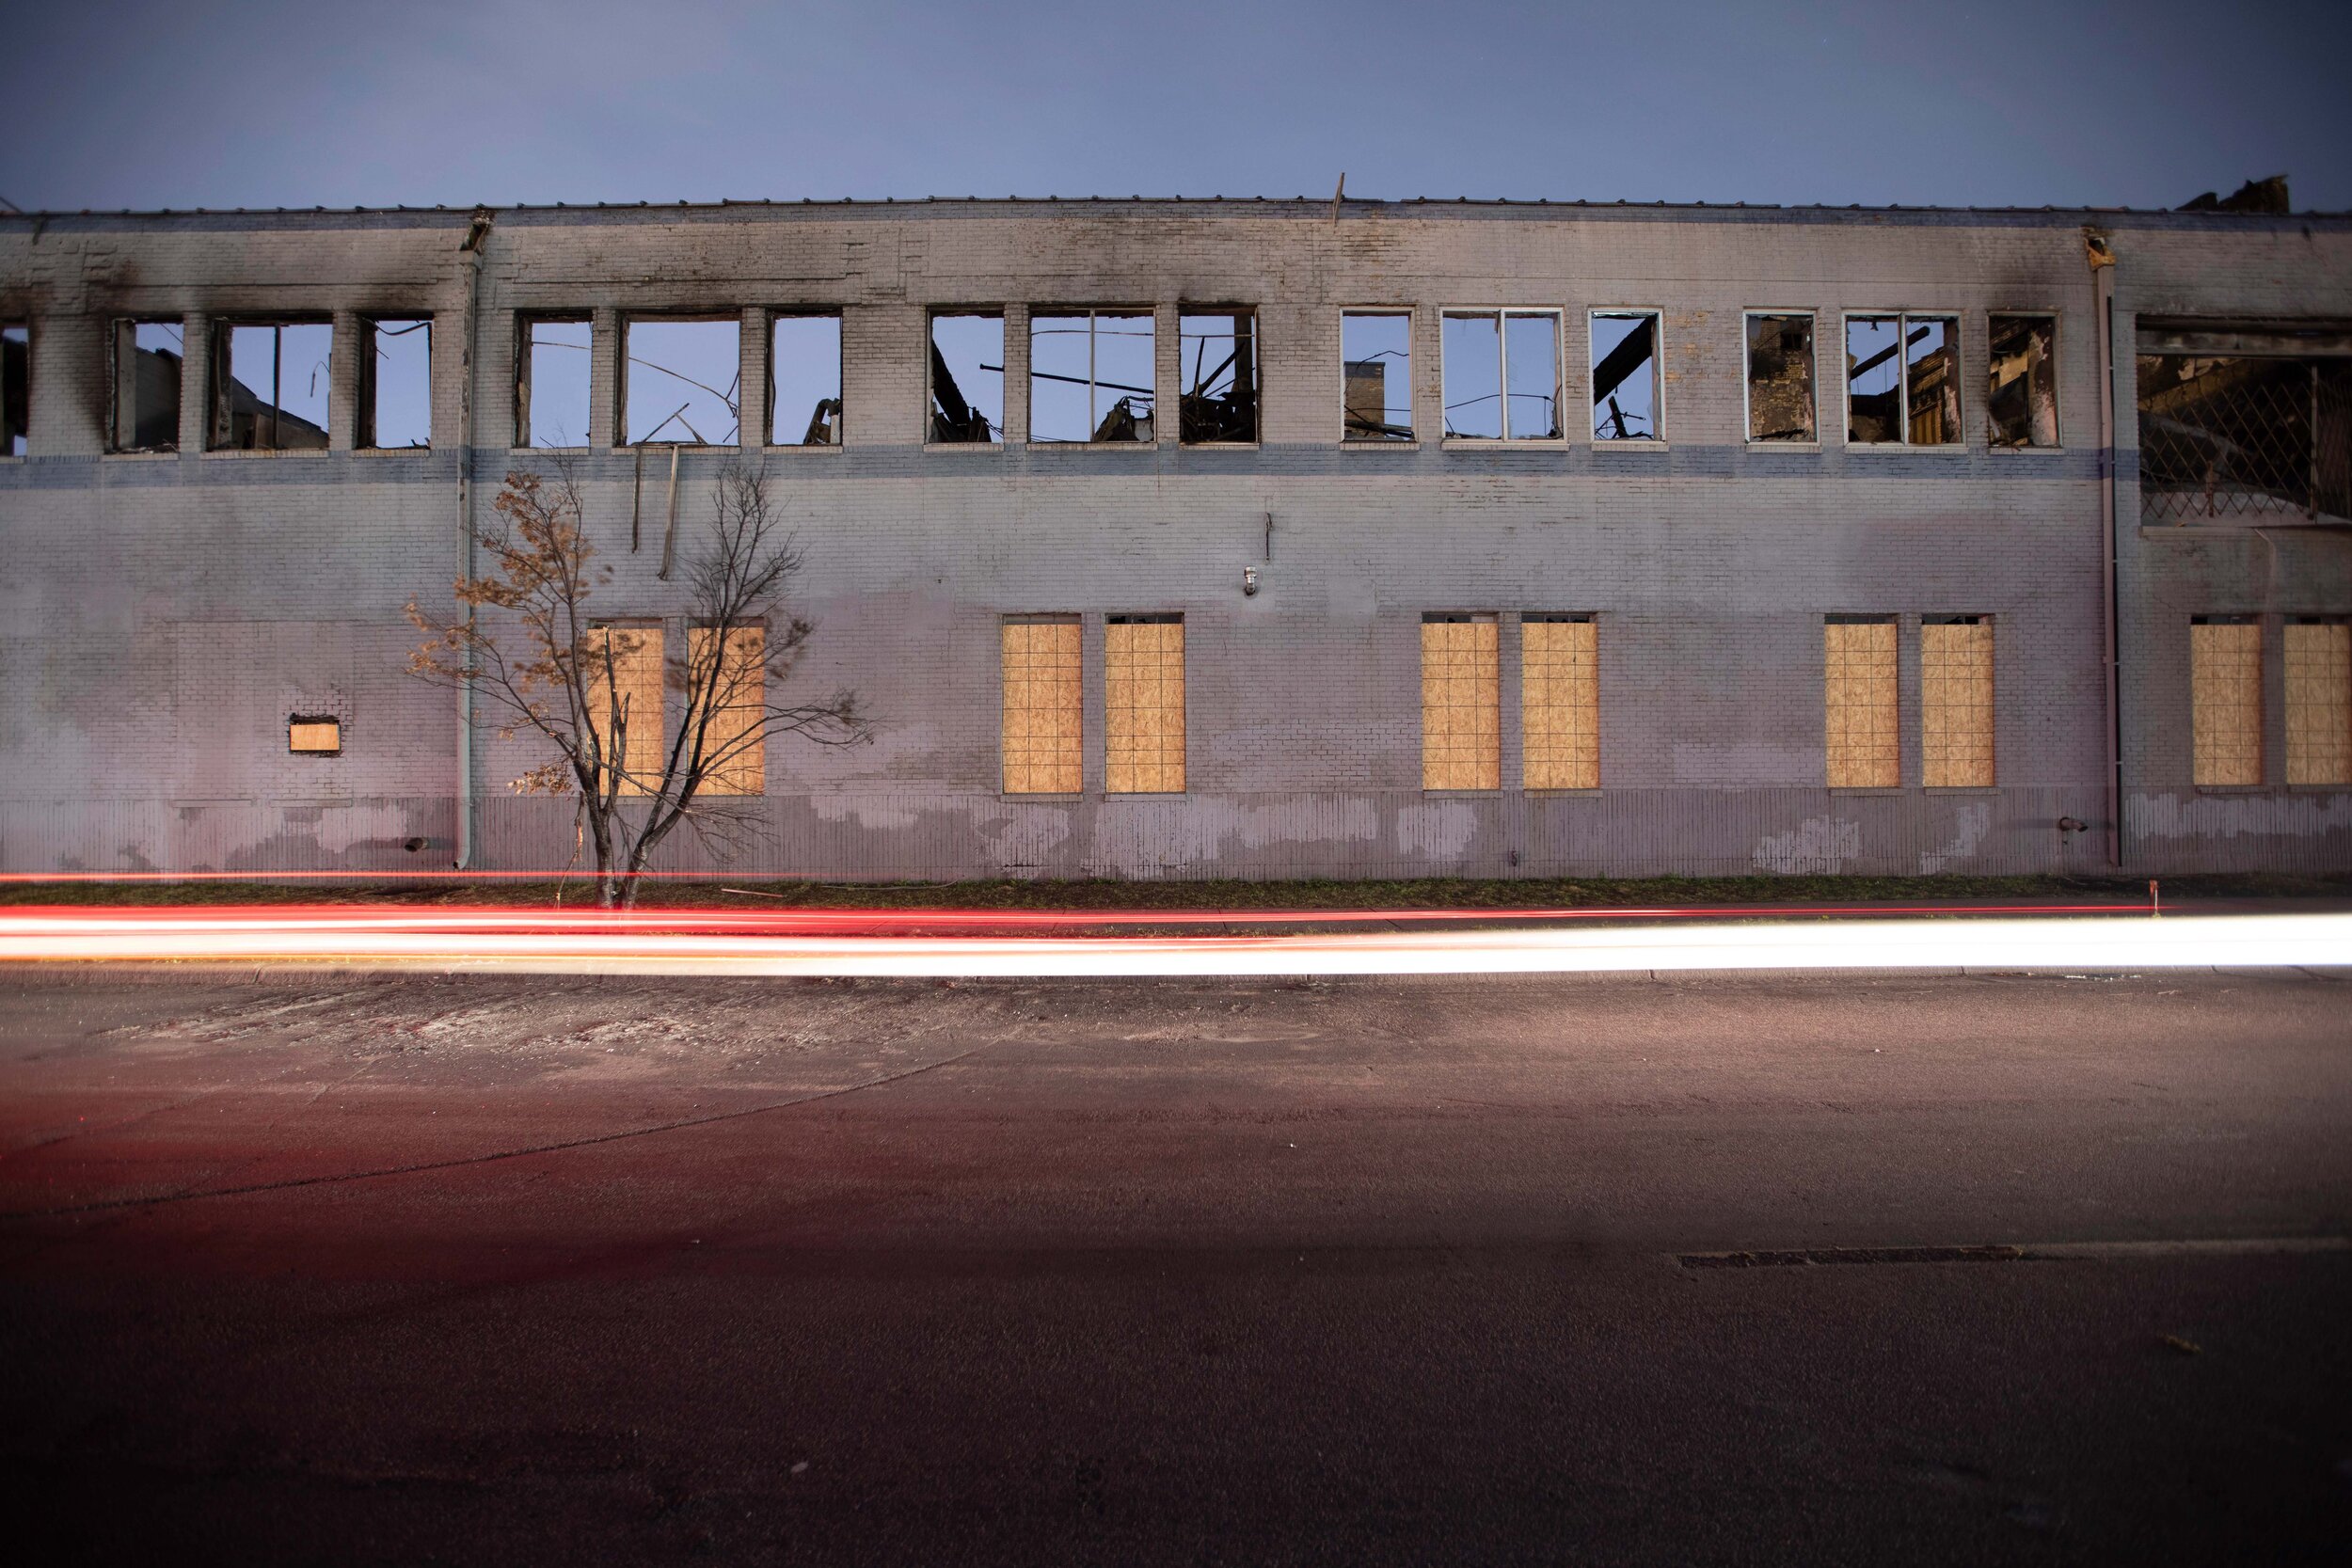  Light trails from a vehicle light up the street as a burned out and destroyed building sits in ruin behind it. During the riots that broke out in Minneapolis this building was set on fire in Minneapolis, Minnesota on Jun 8, 2020. 